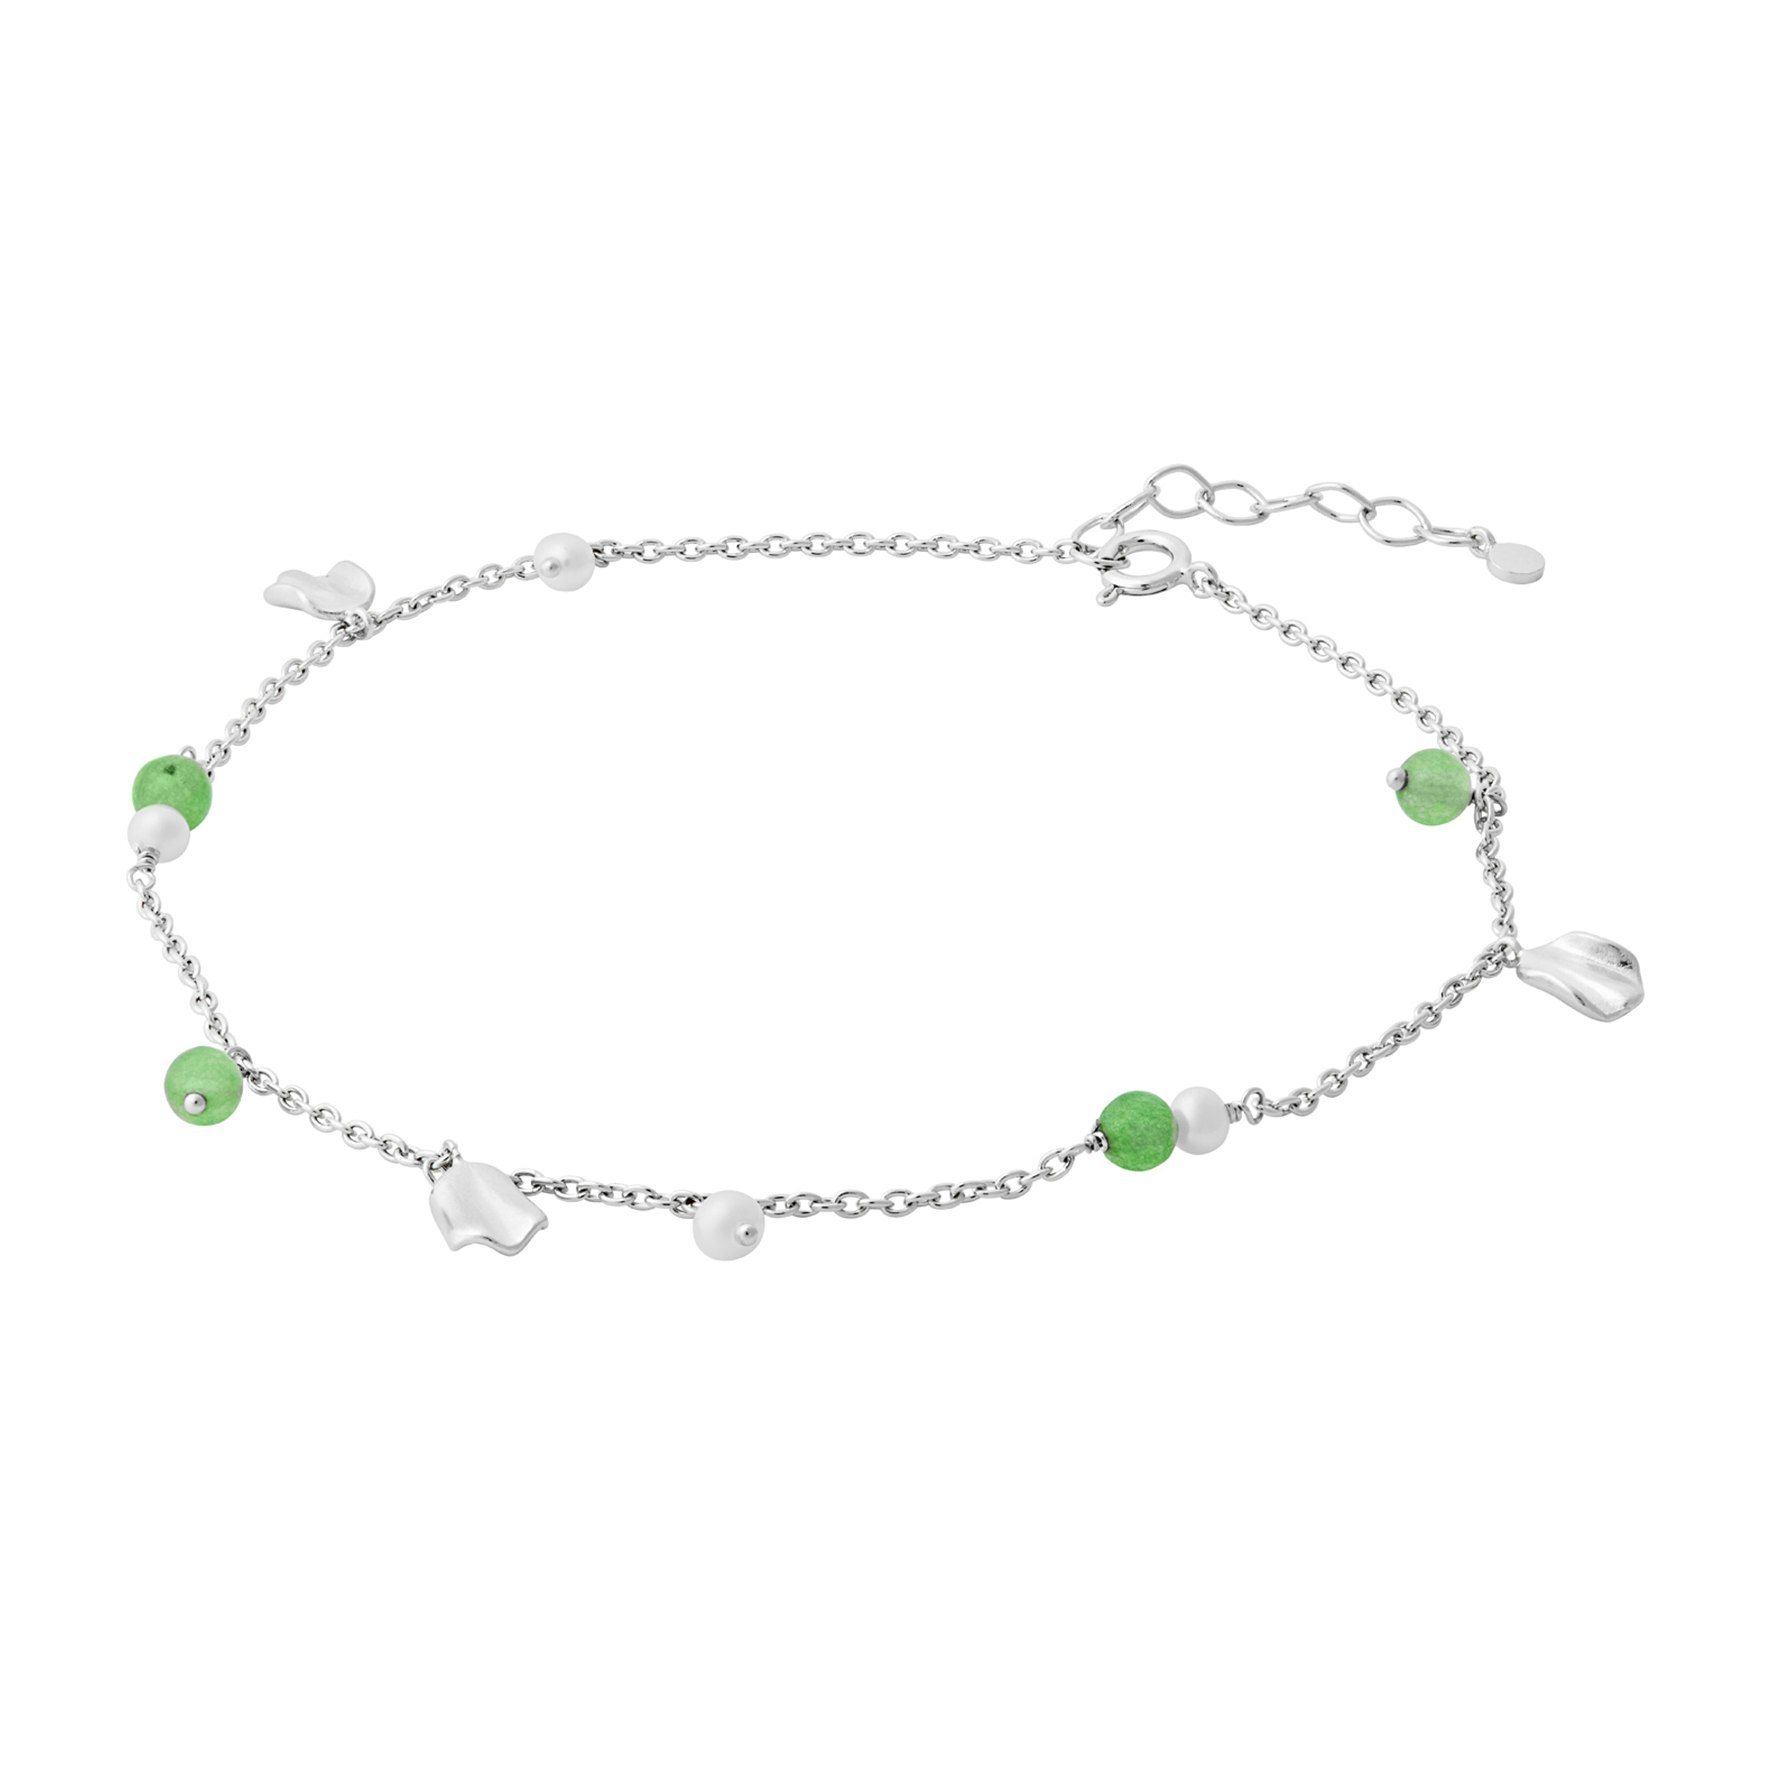 Ocean Hope Anklet from Pernille Corydon in Silver Sterling 925